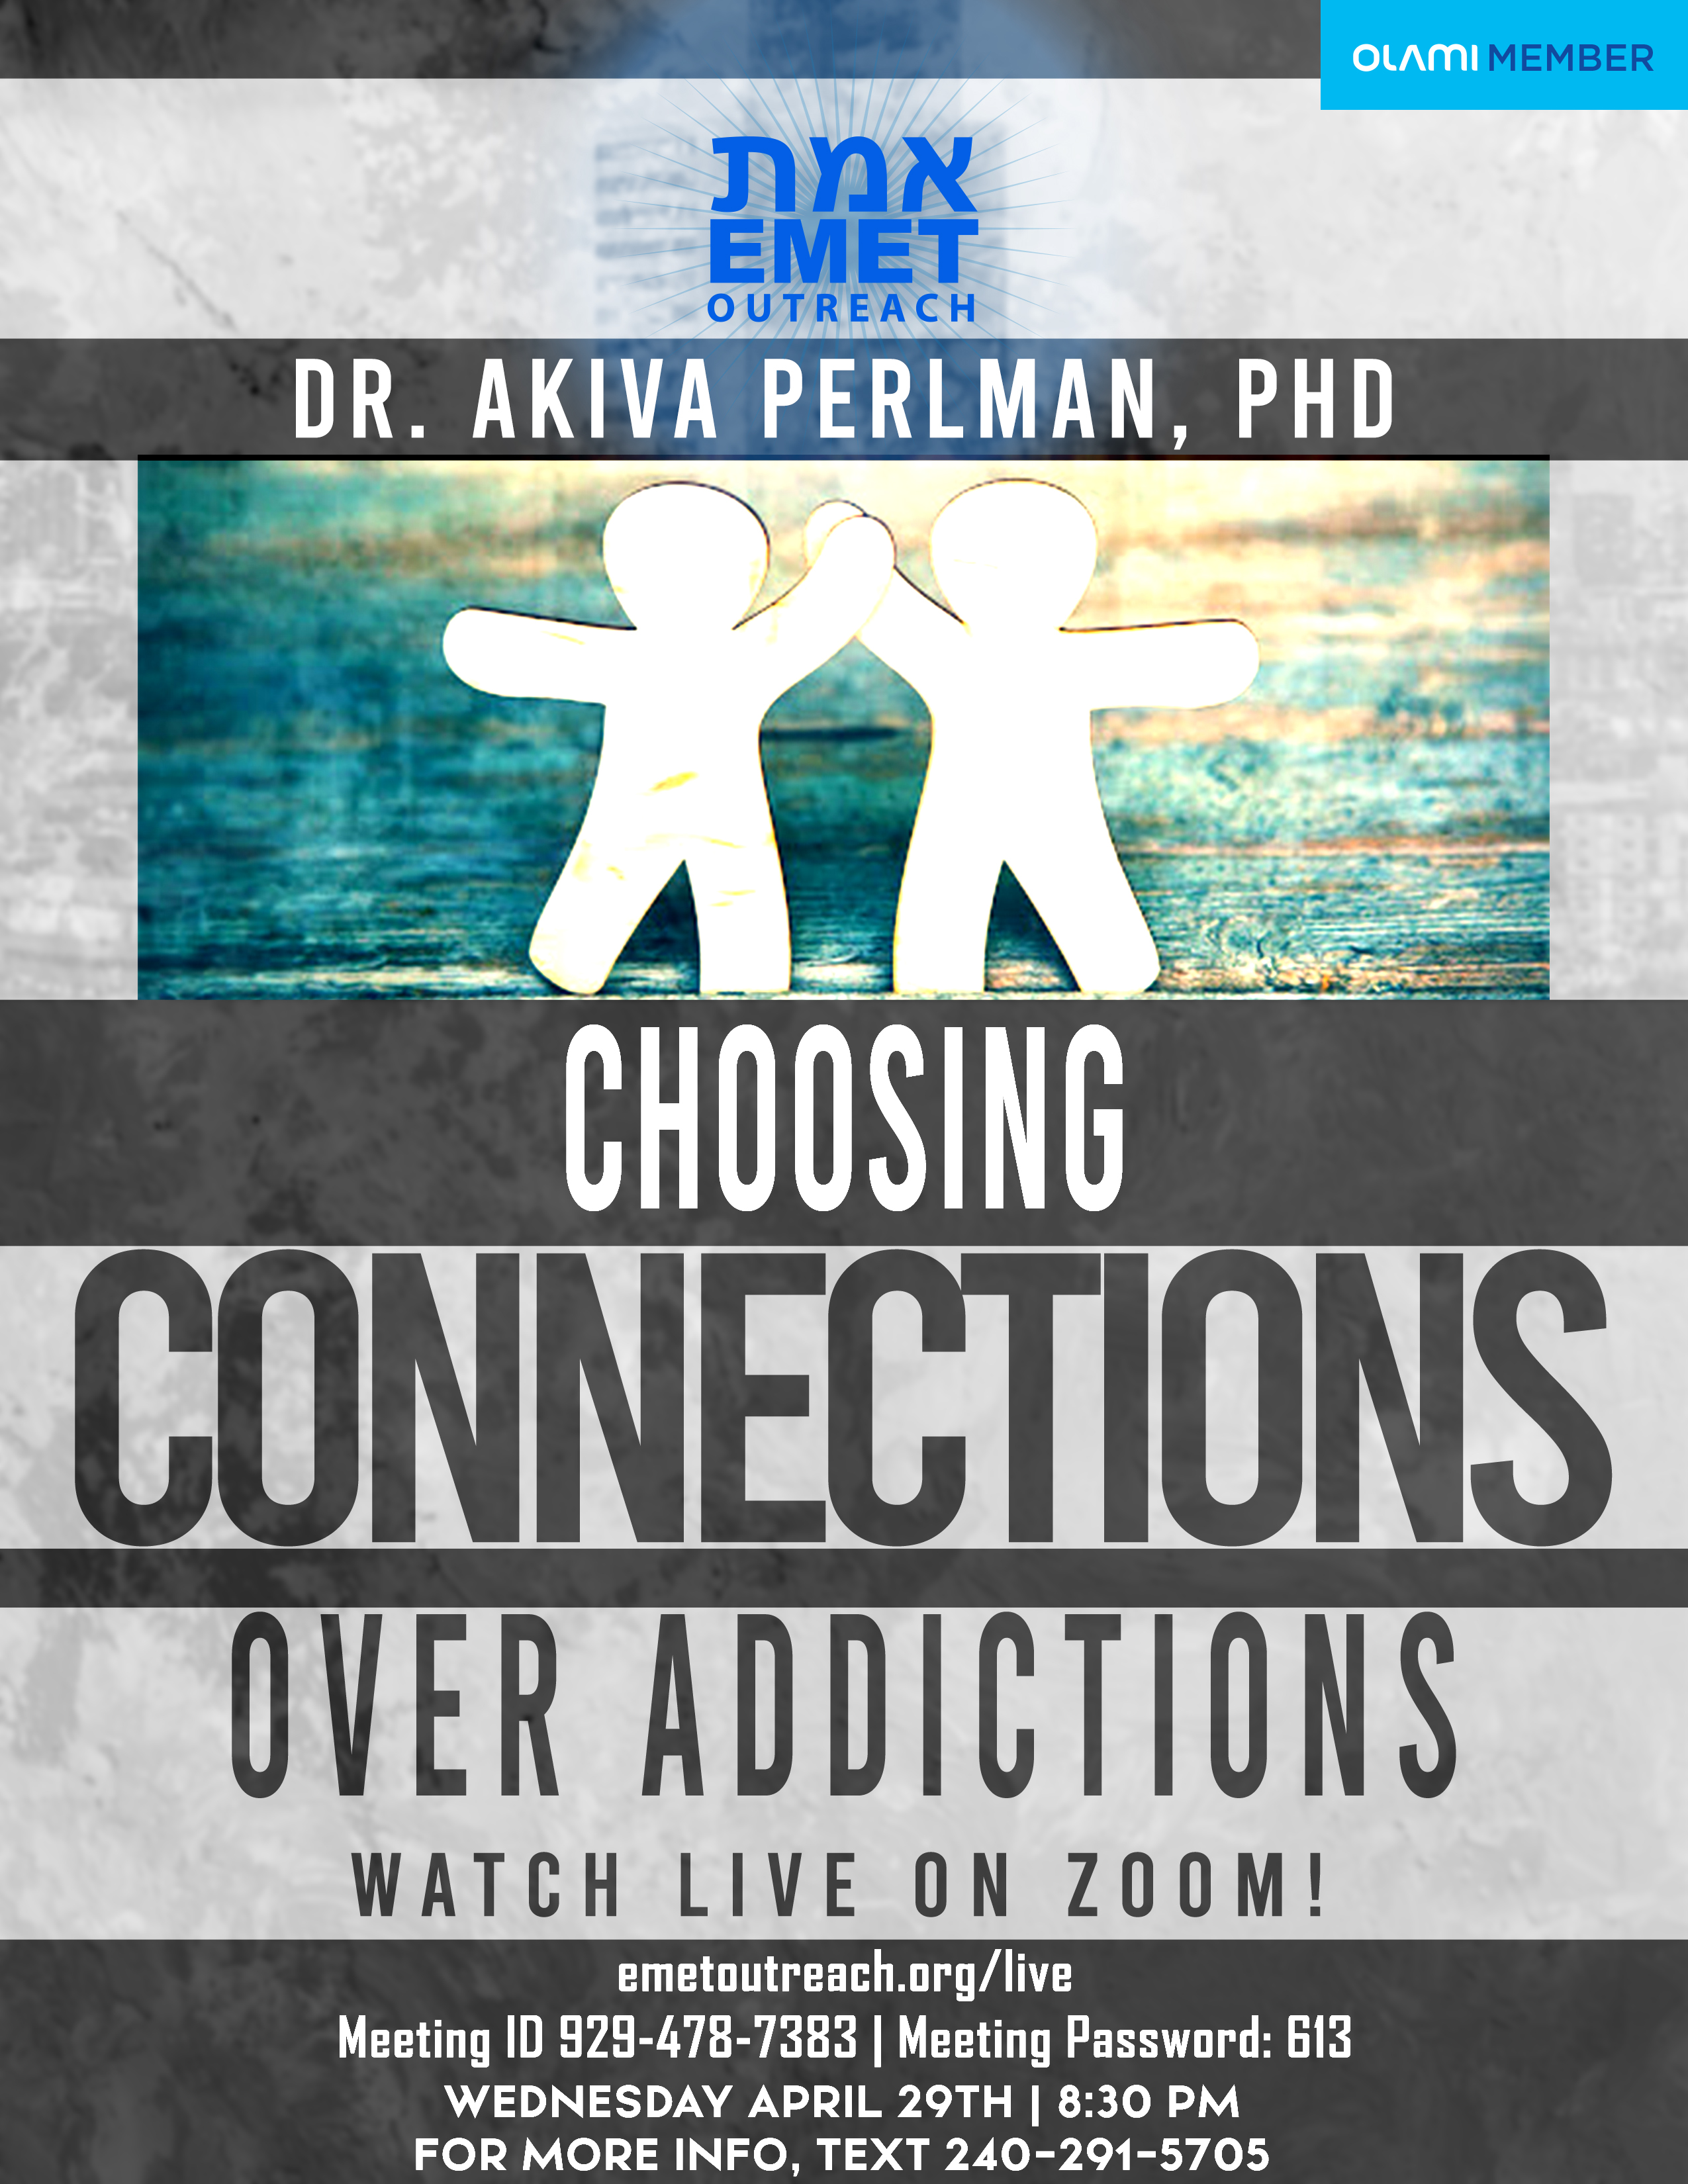 Dr. Perlman Connections Over Addiction 2020 v2